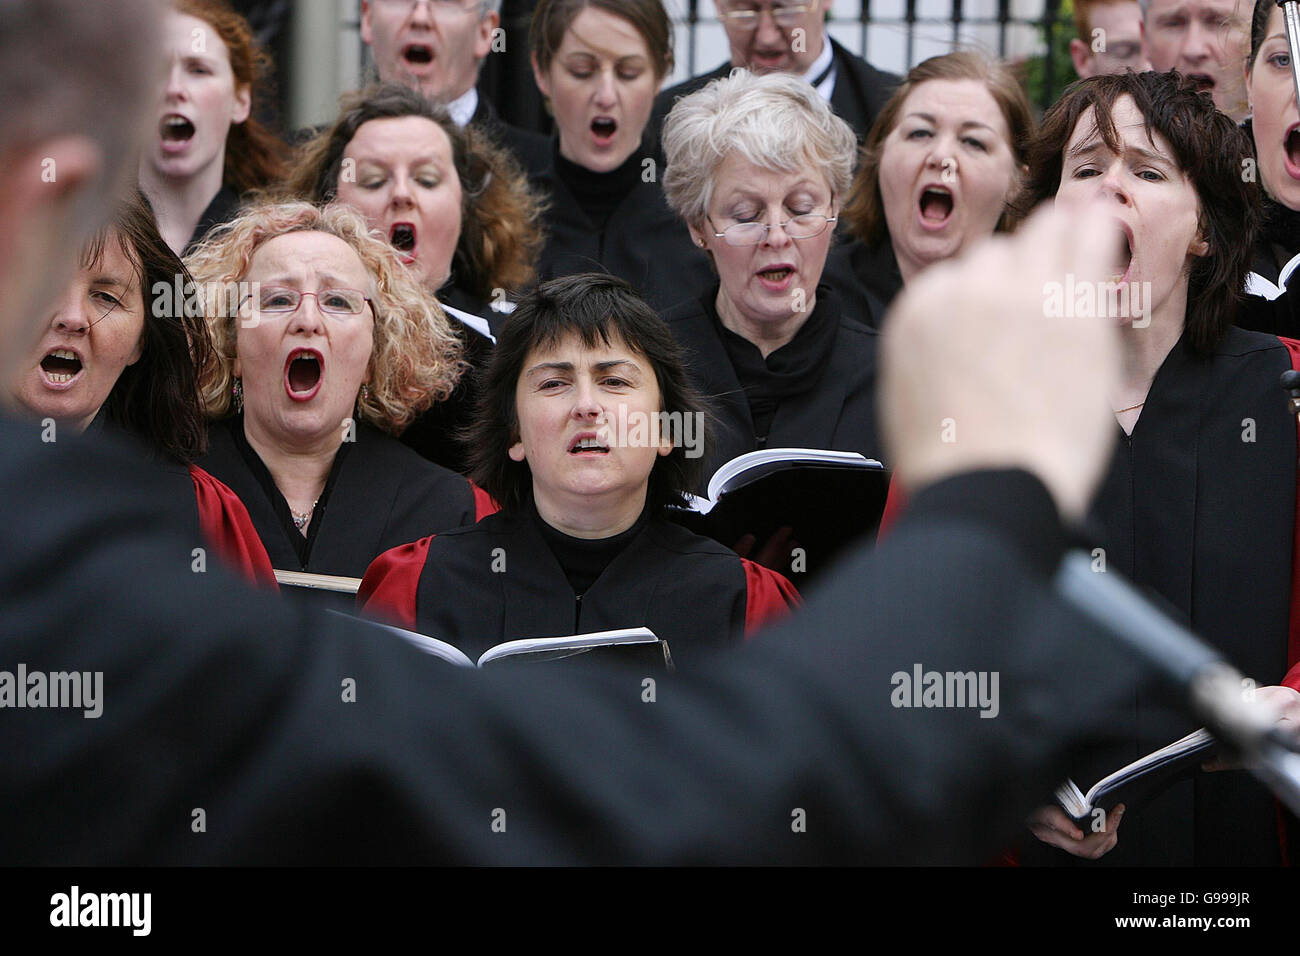 Conductor Proinnsias O Duinn conducts the Choir at the anniversary of the first ever performance of Handel's Messiah was celebrated today by hundreds of music fans in Fishamble Street, Temple Bar, Dublin. Stock Photo